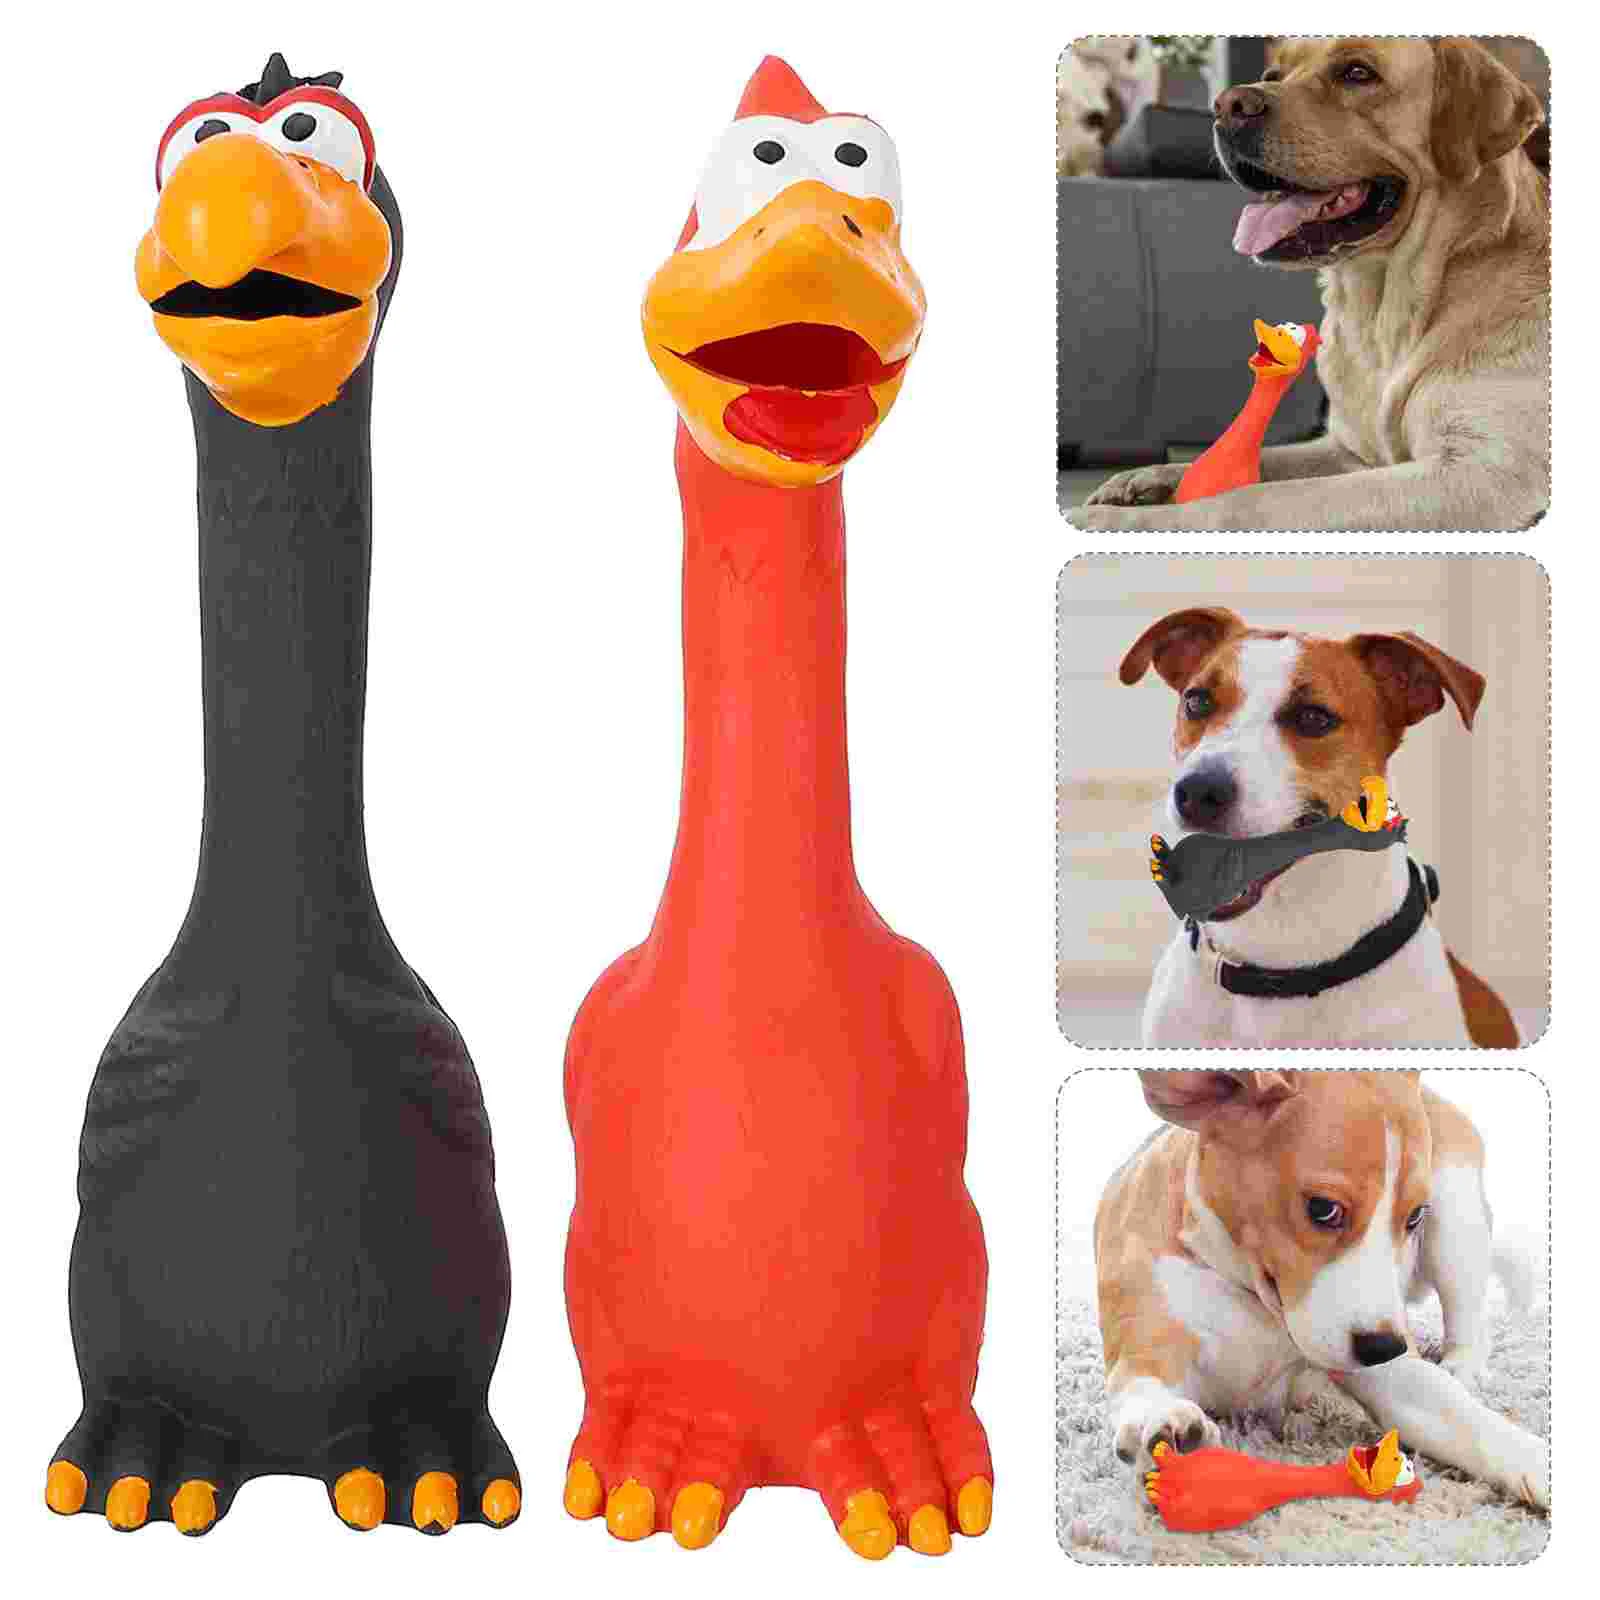 

Toy Toys Dog Pet Squeaky Chicken Chewing Screaming Teething Interactive Puppy Sound Molar Chew Training Plaything Cats Bite